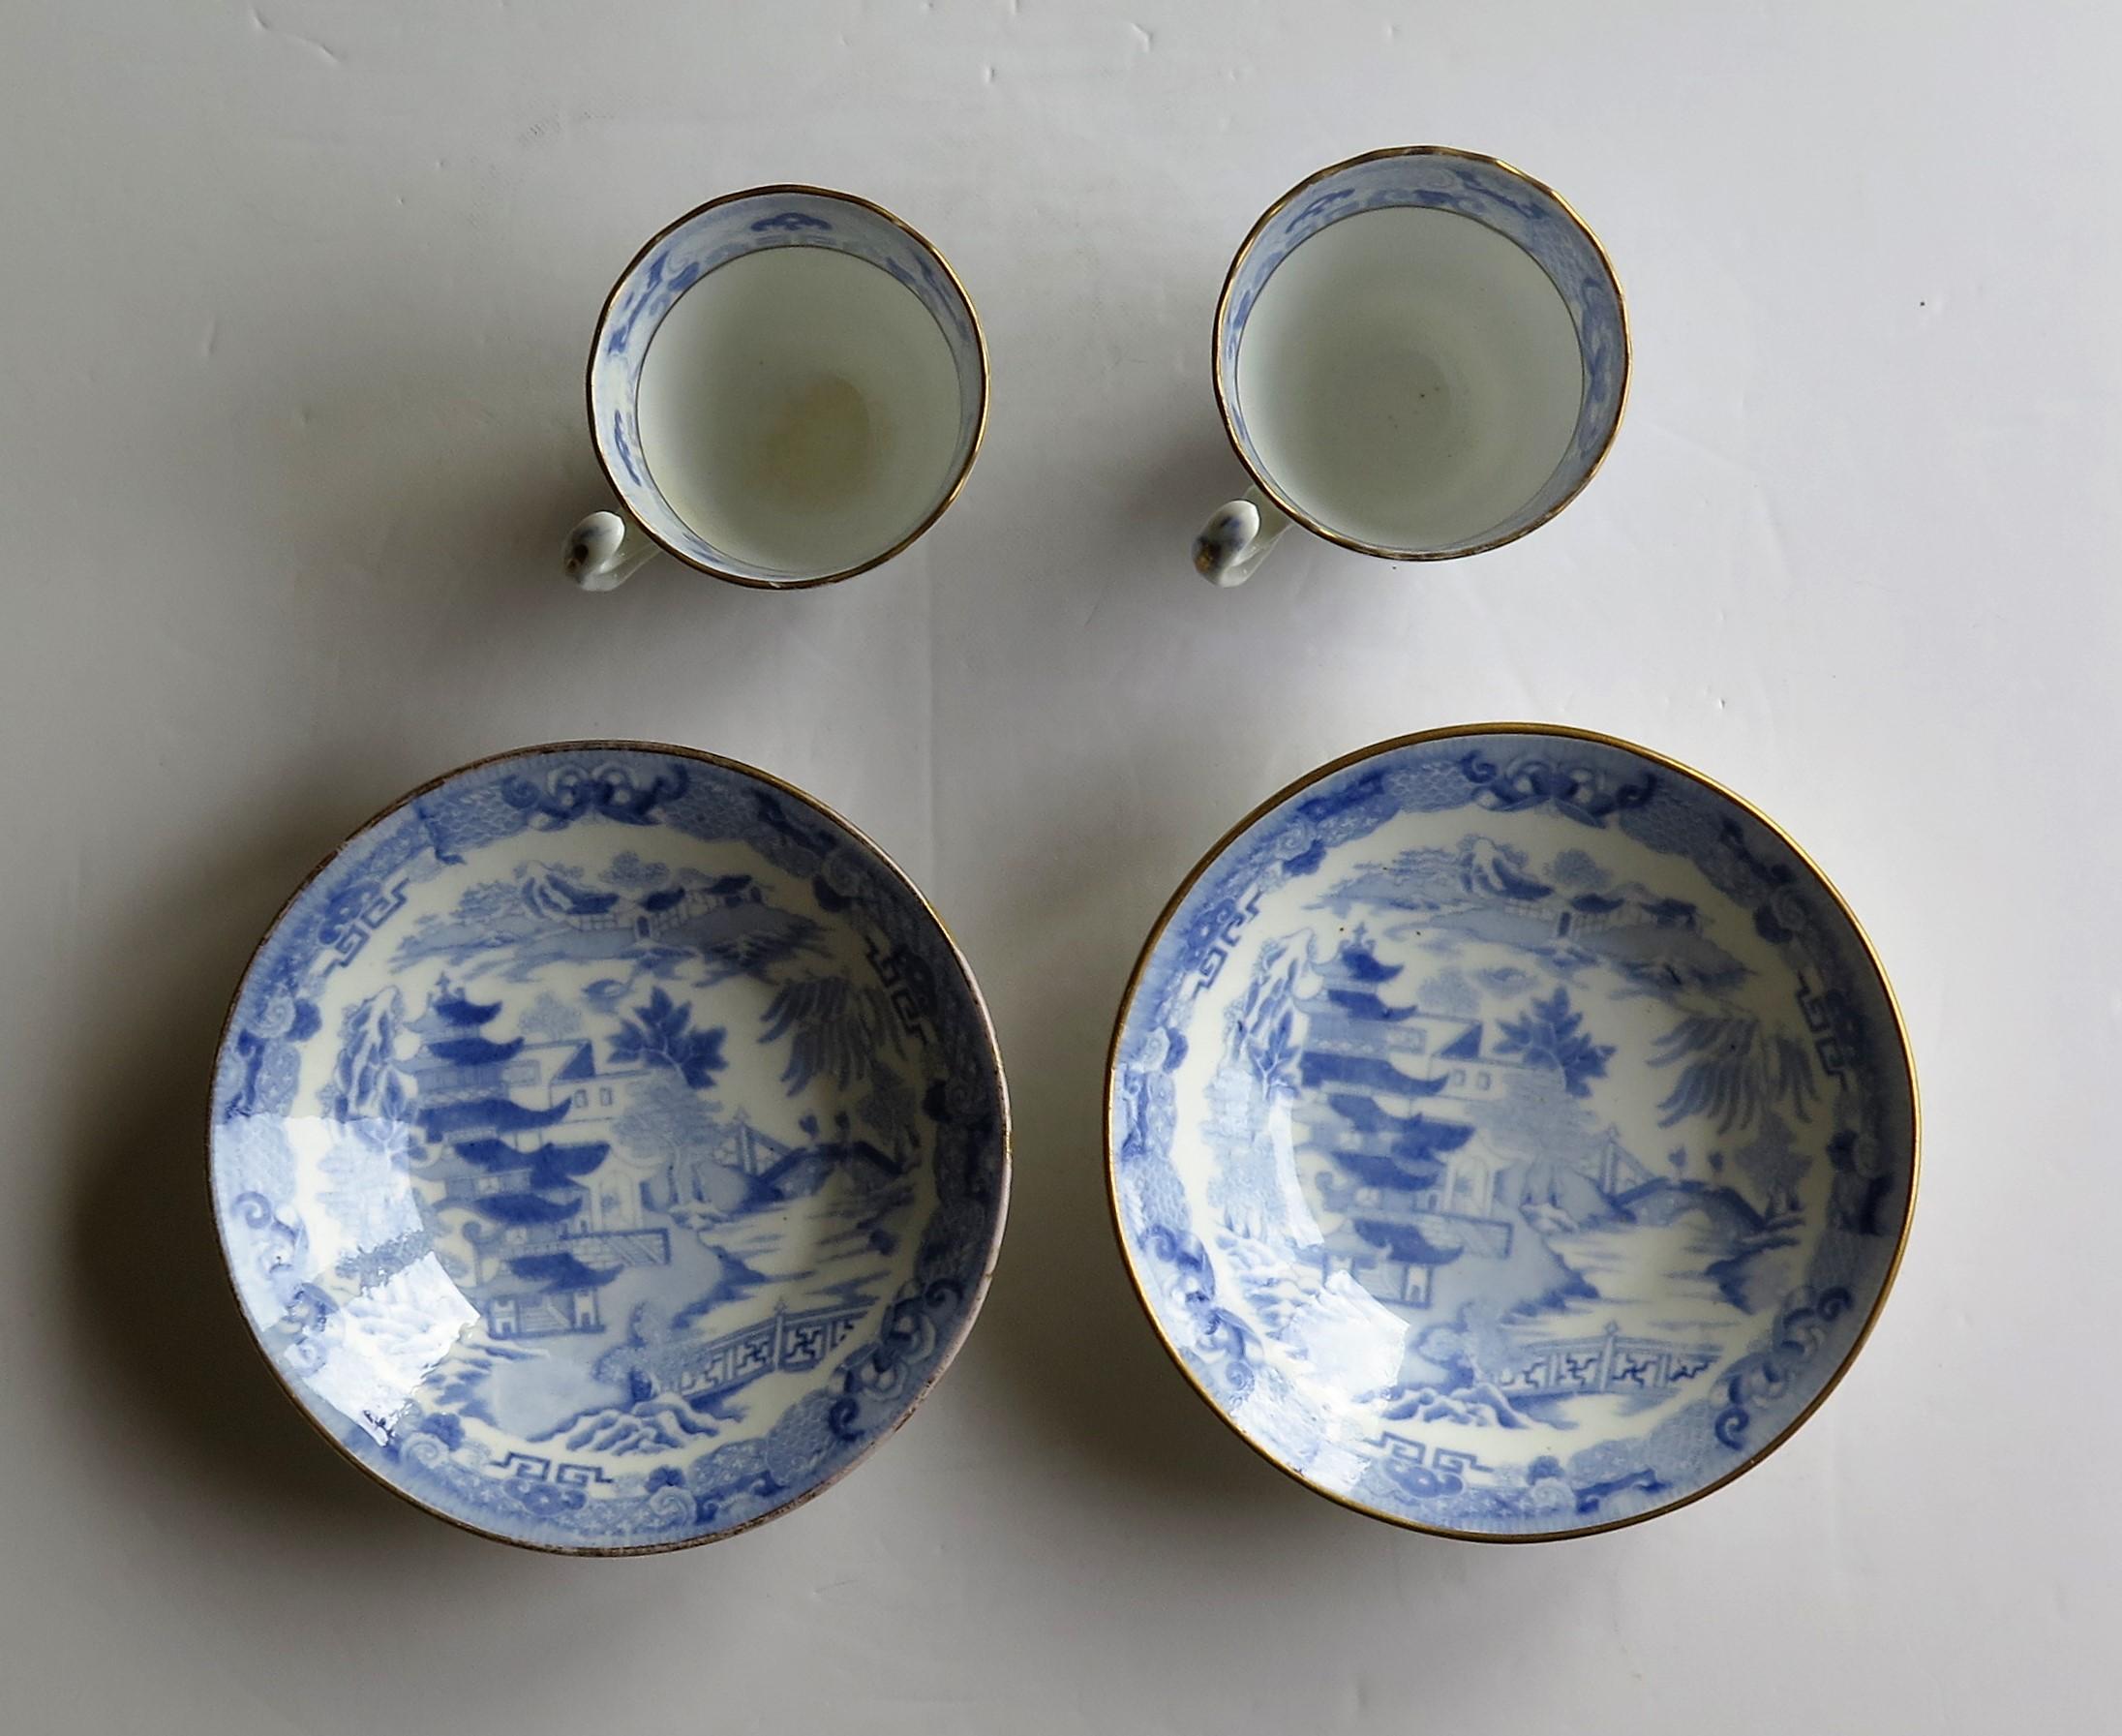 Chinoiserie Miles Mason Porcelain Pair of Cups & Saucers Blue Broseley Willow Ptn circa 1815